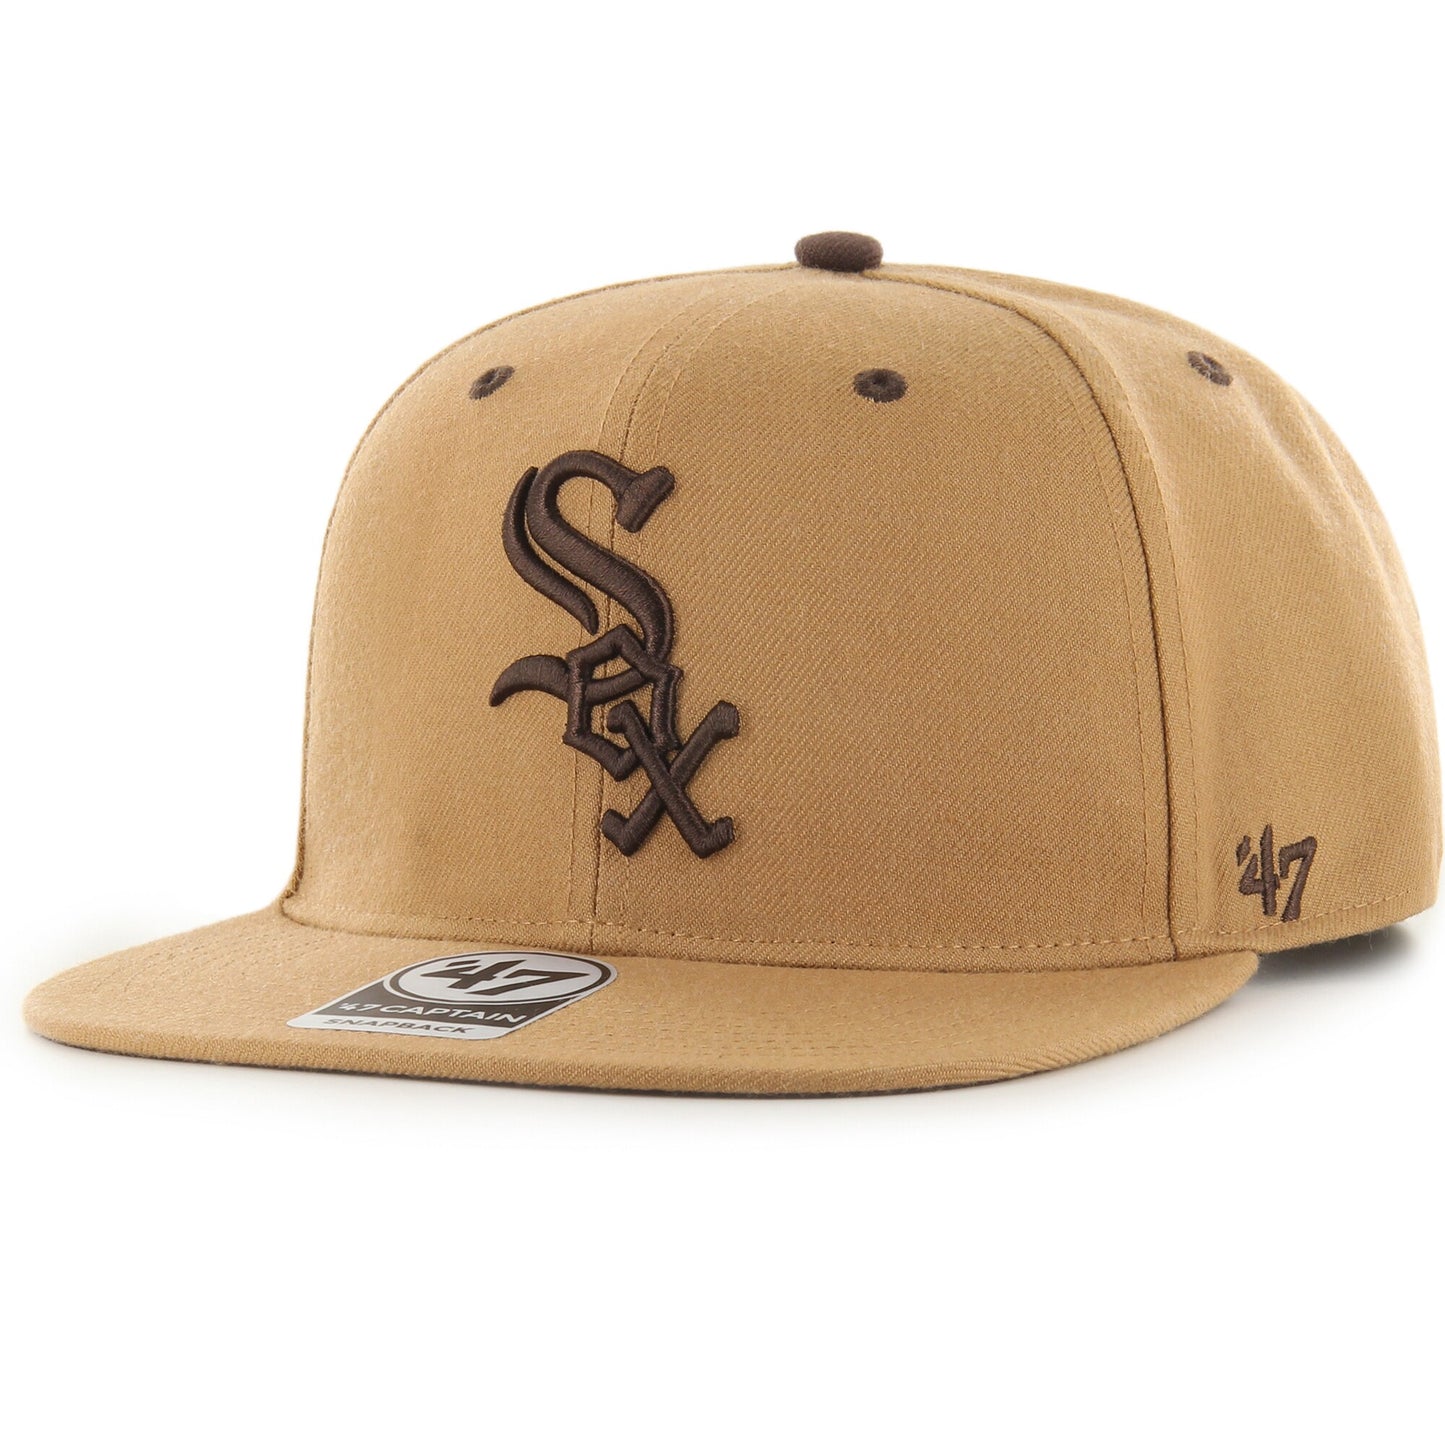 Chicago White Sox '47 Captain Snapback Hat - Toffee